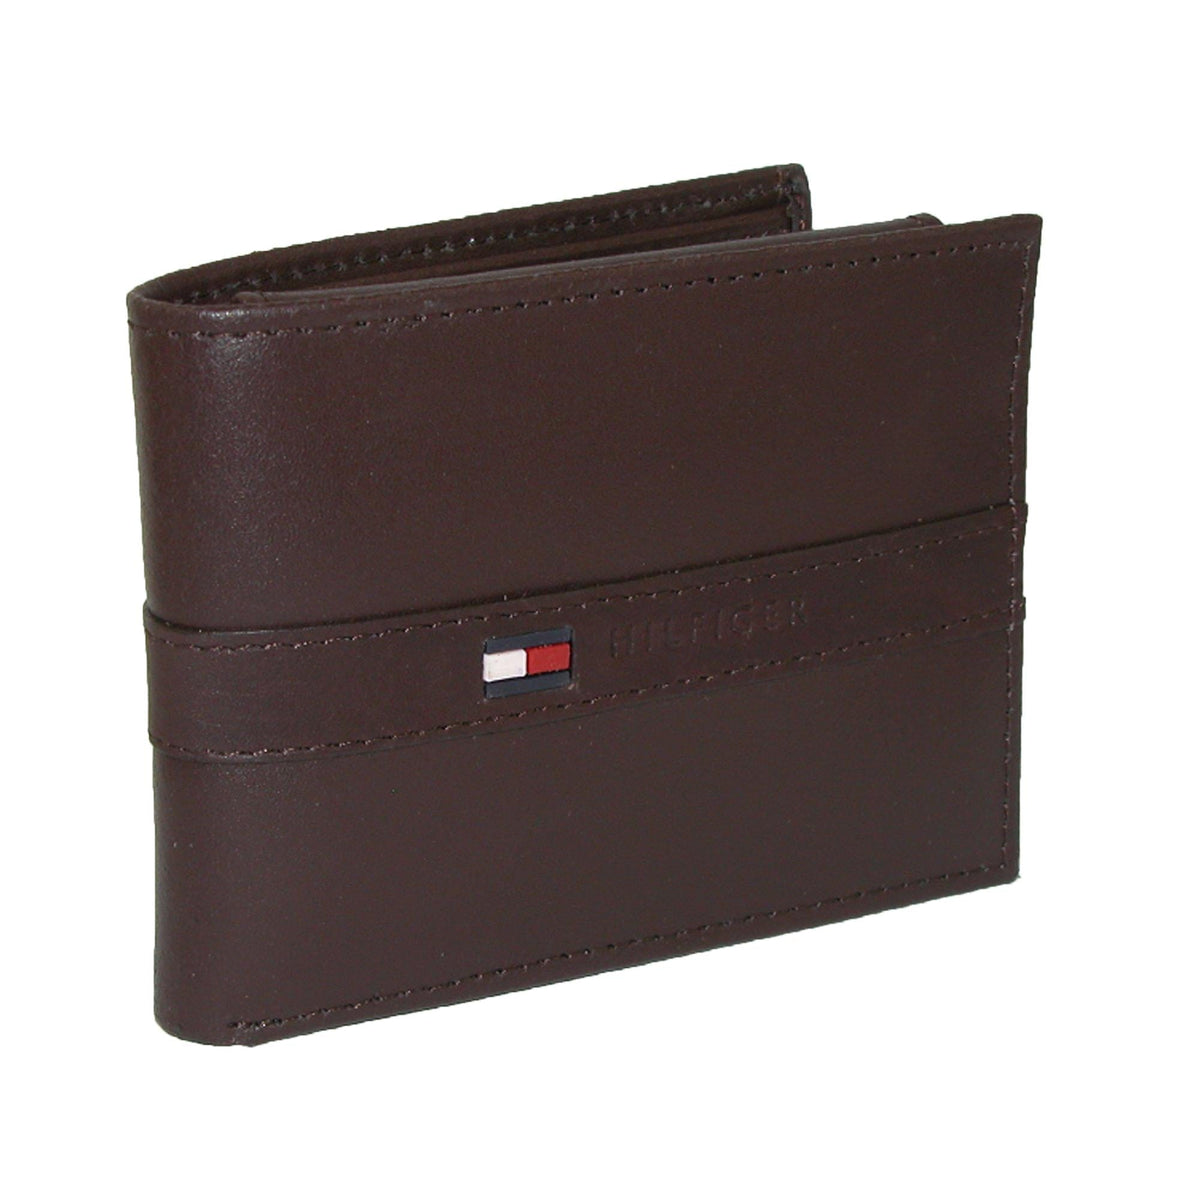 Ranger Belt Company's Men's Leather Tooling and Hide Cross Trifold Wallet